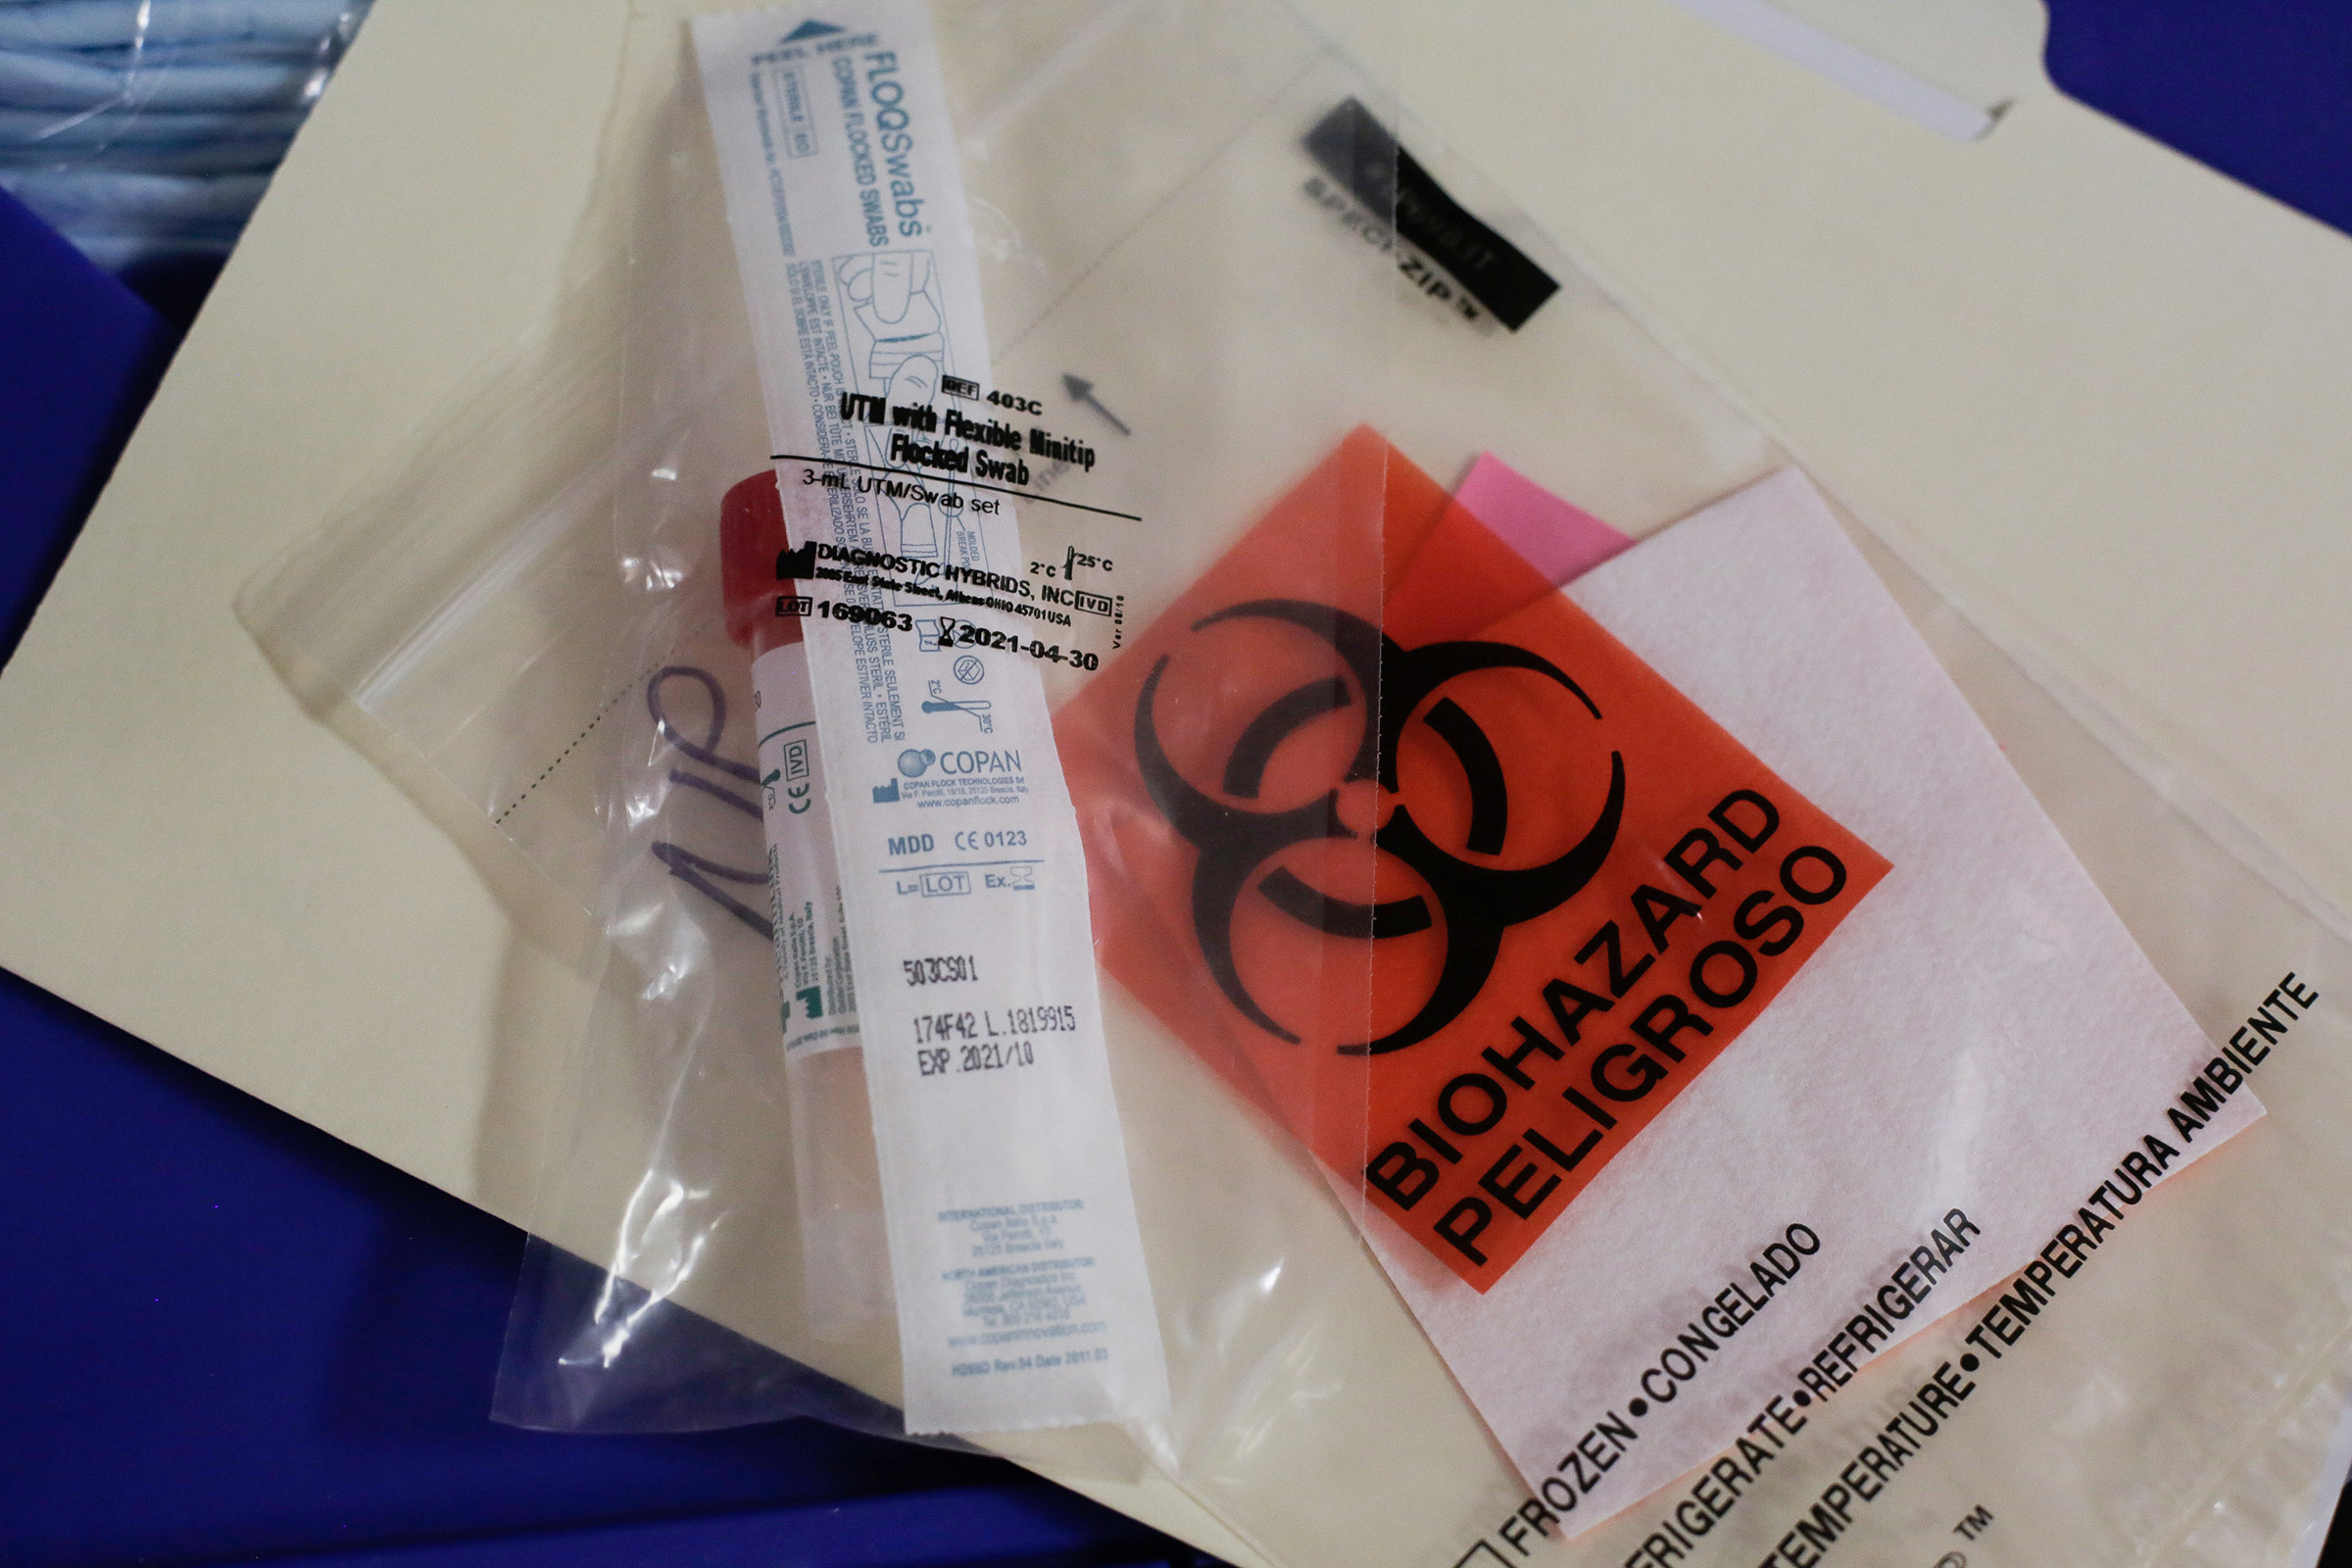 A swab to be used for testing novel coronavirus is seen in the supplies of Harborview Medical Center's home assessment team during preparations to visit the home of a person potentially exposed to novel coronavirus at Harborview Medical Center in Seattle